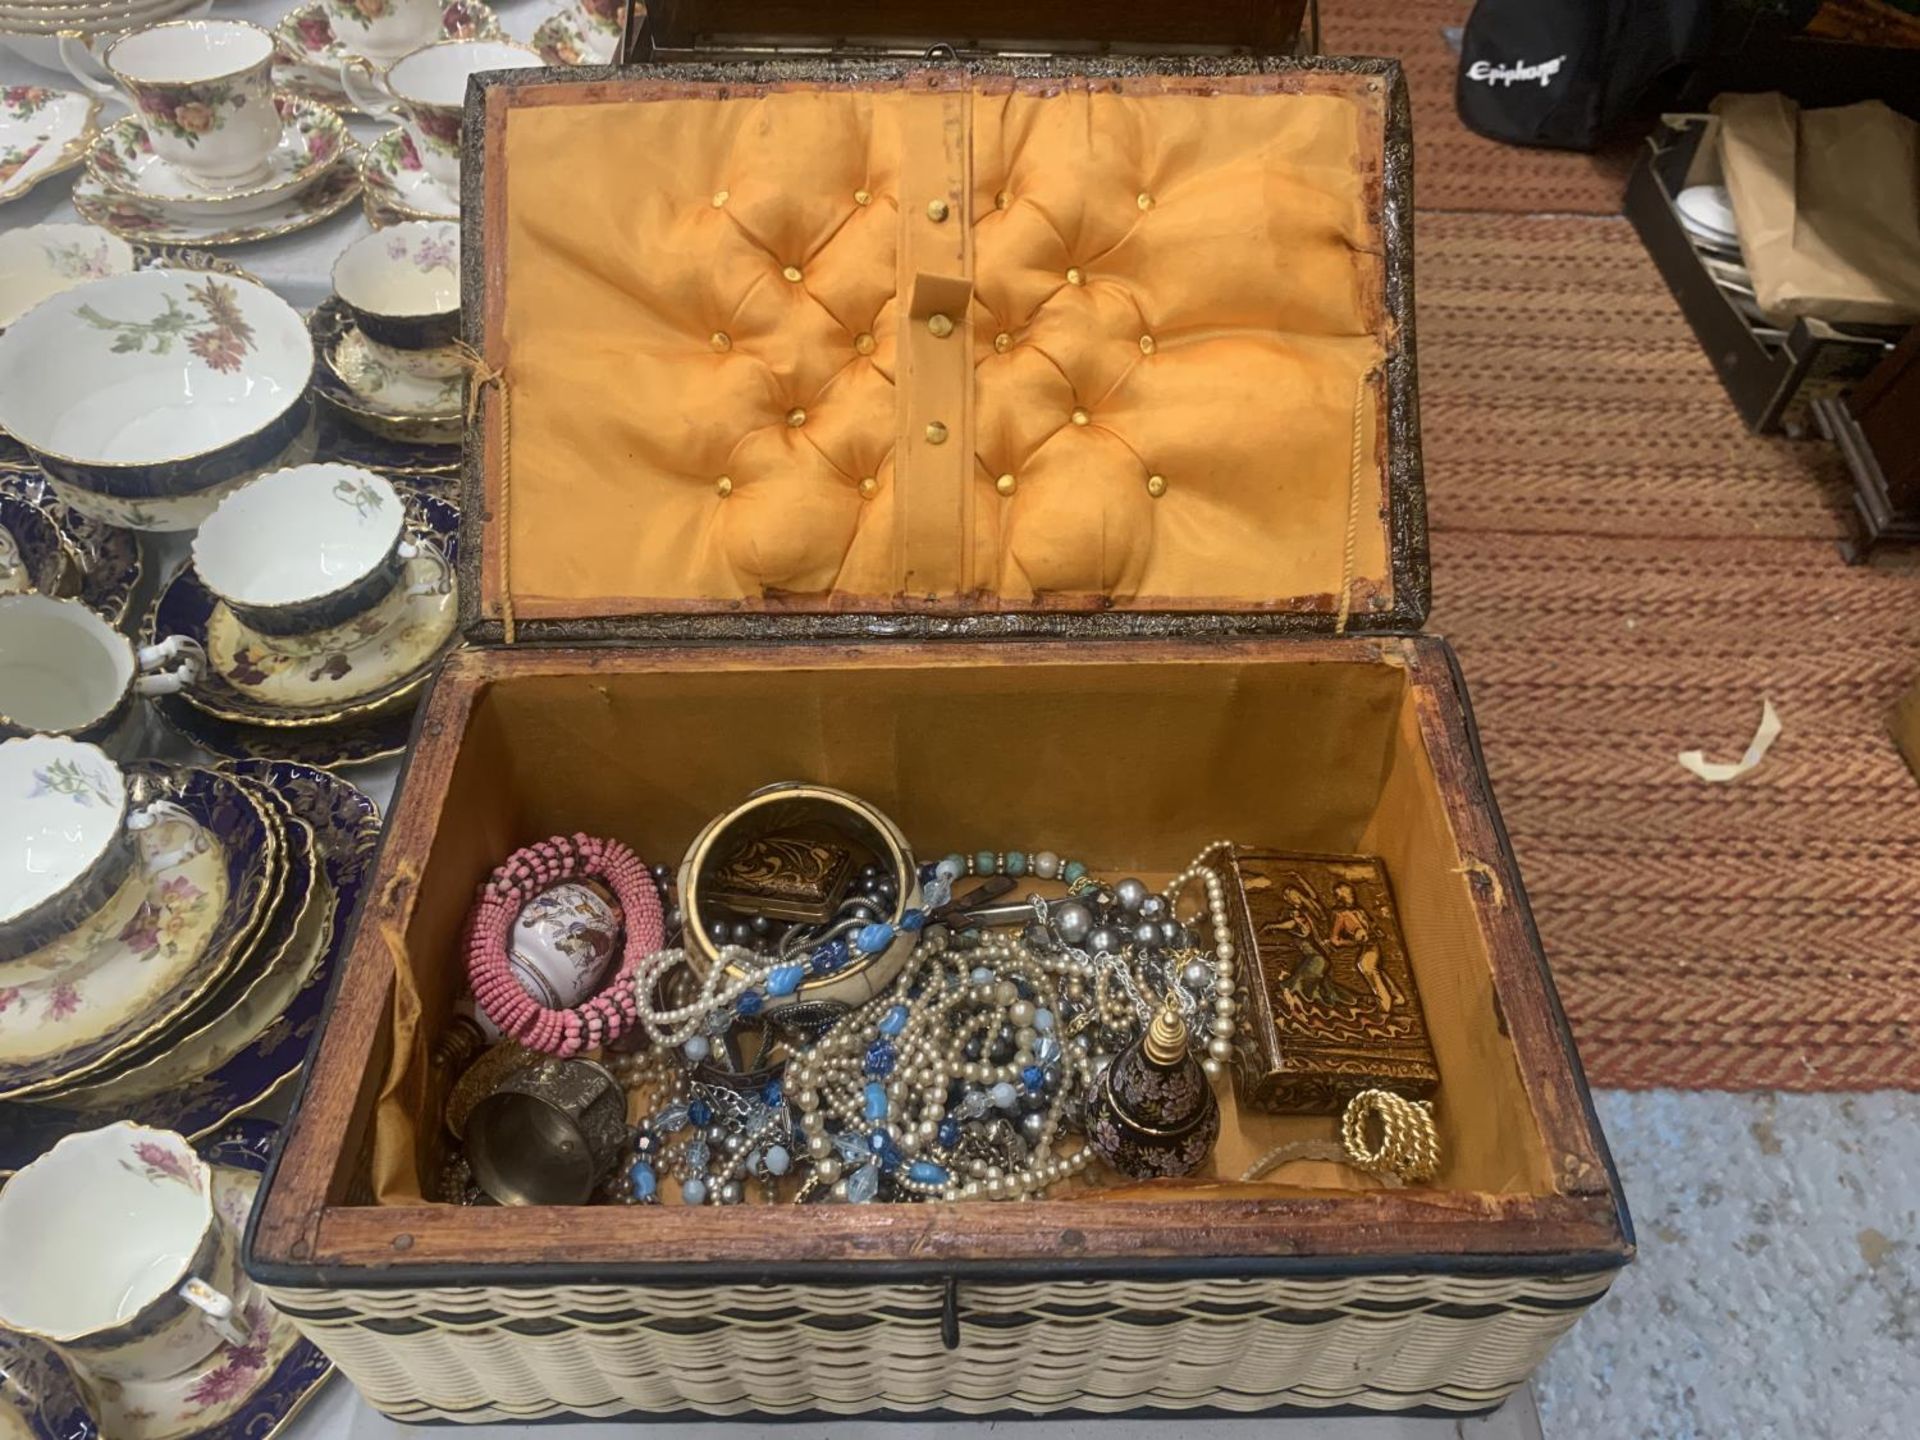 A QUANTITY OF COSTUME JEWELLERY TO INCLUDE BANGLES, WATCHES, BEADS, COLLECTABLES, ETC IN A VINTAGE